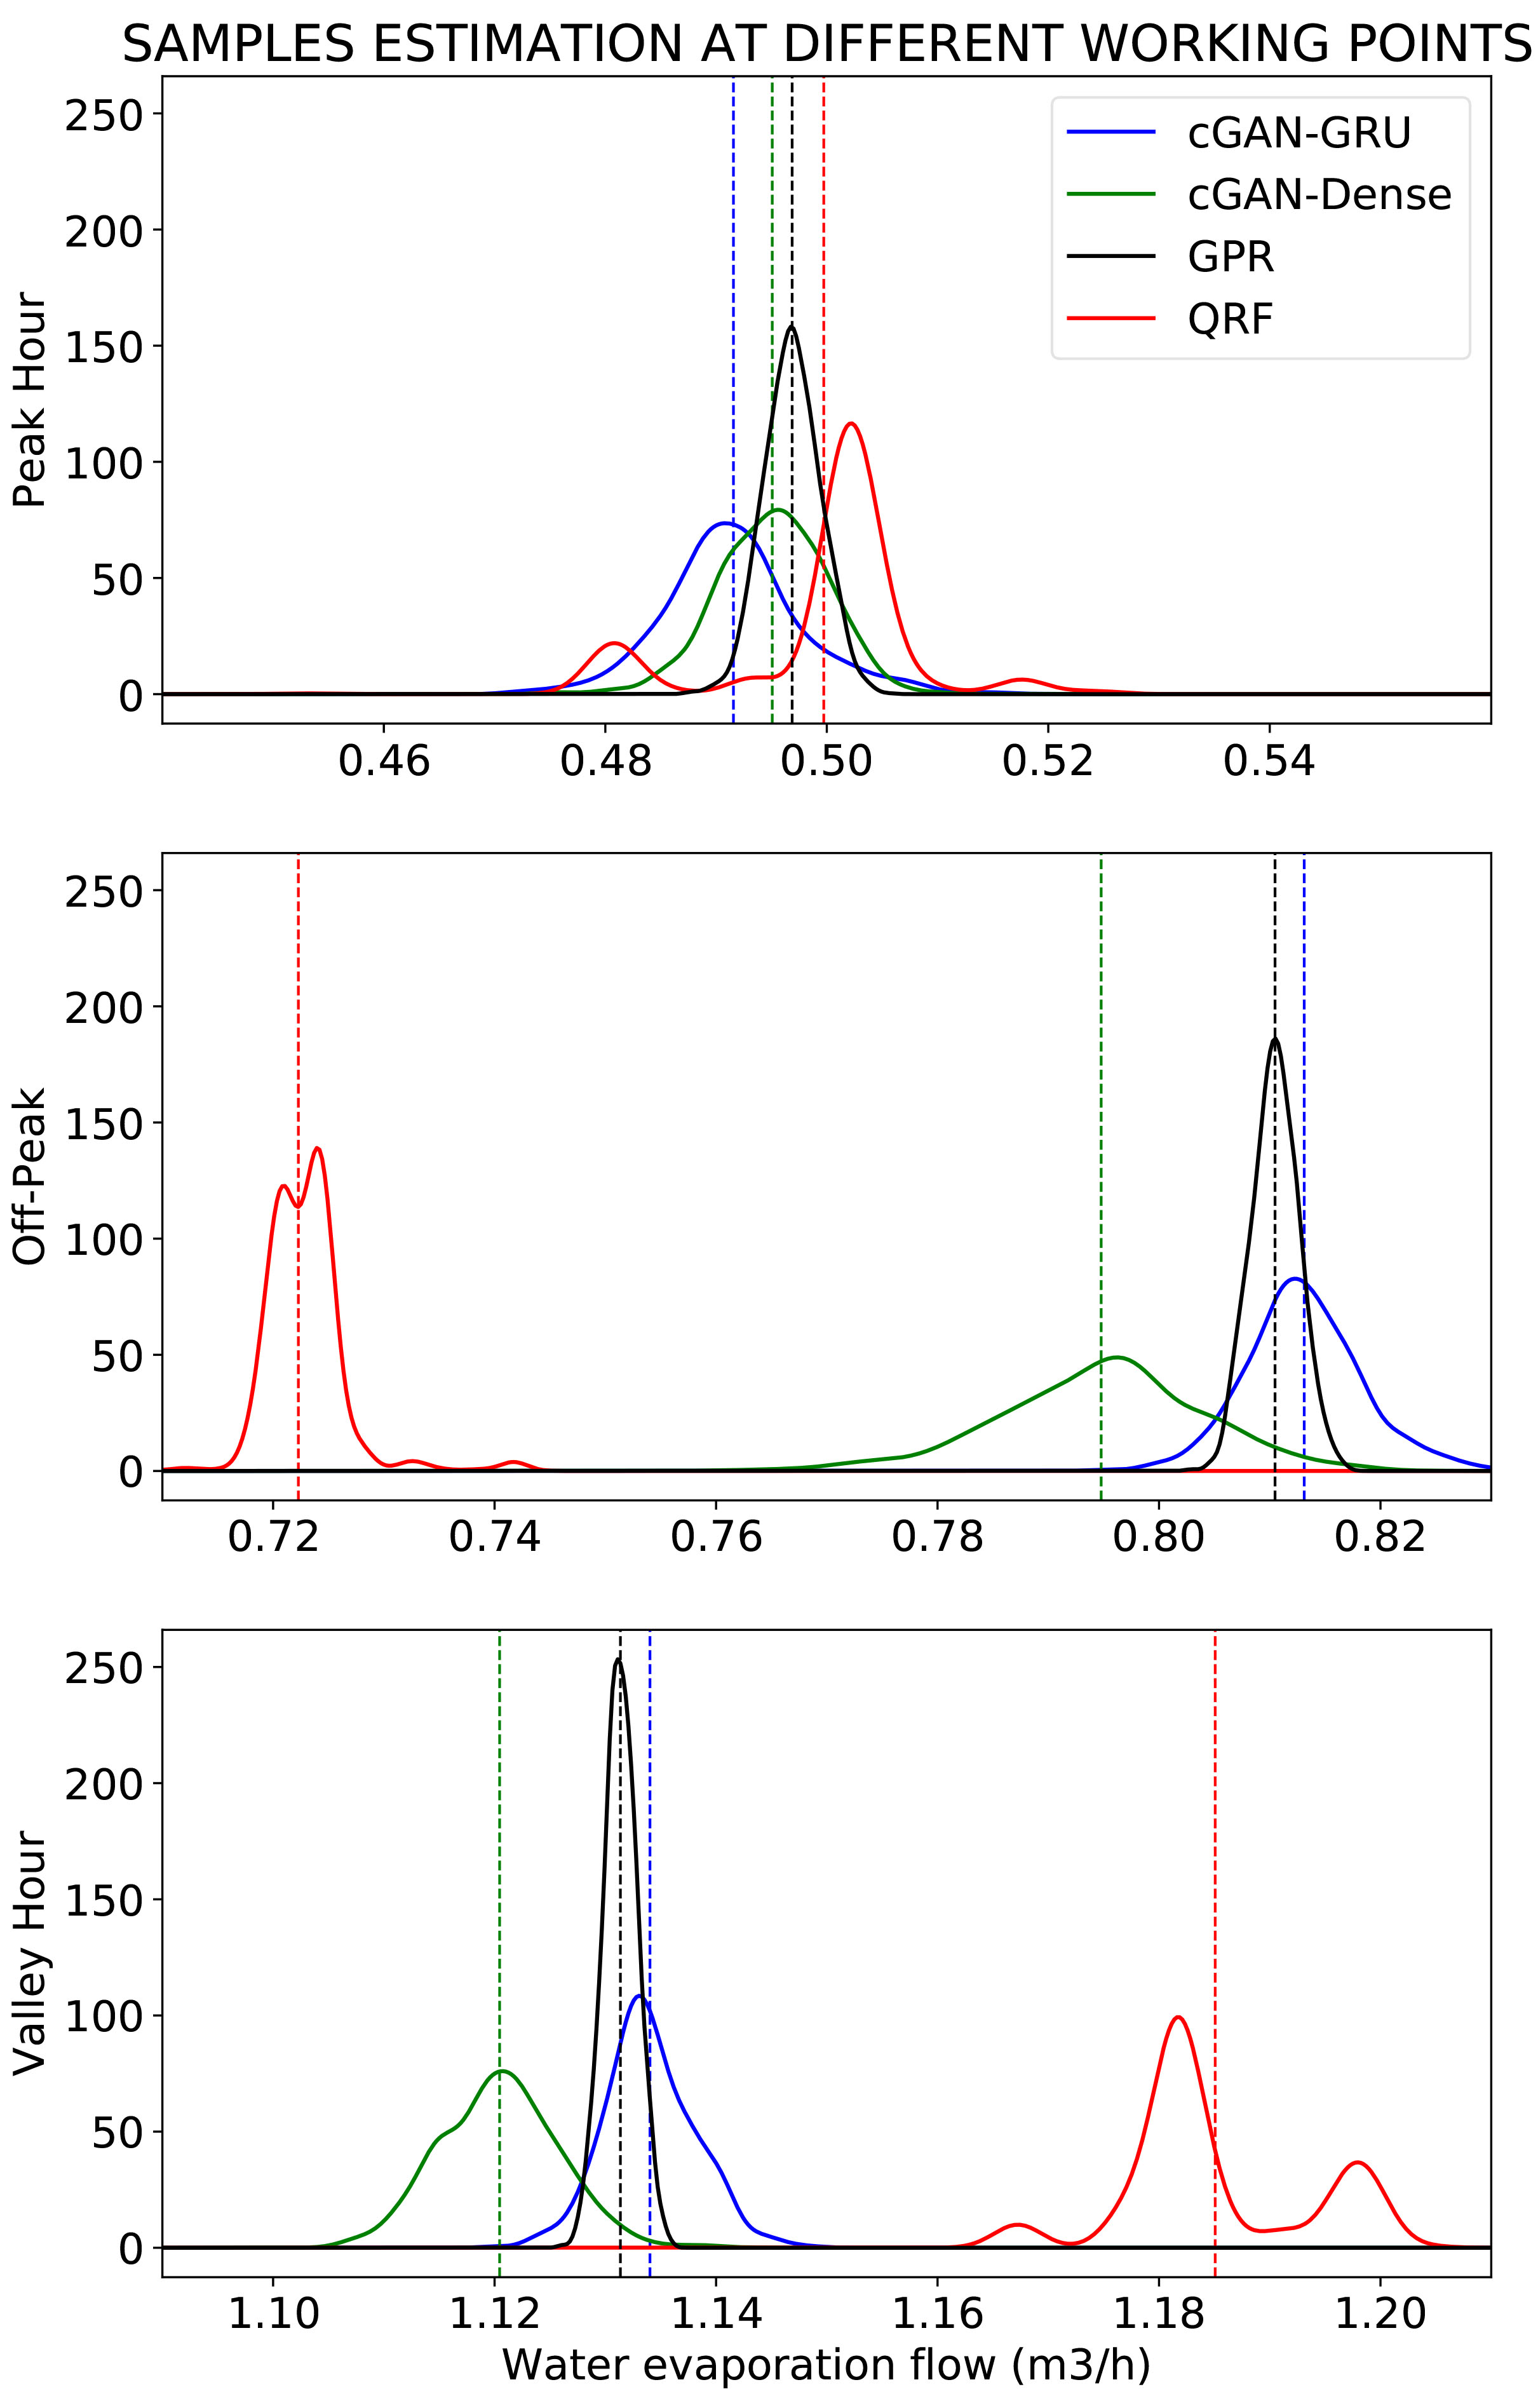 Probability distributions of the evaporation in different operating points of the cooling tower (Top: peak hour in the evaporation curve; center: off-peak hour in the evaporation curve; bottom: valley hour in the evaporation curve).